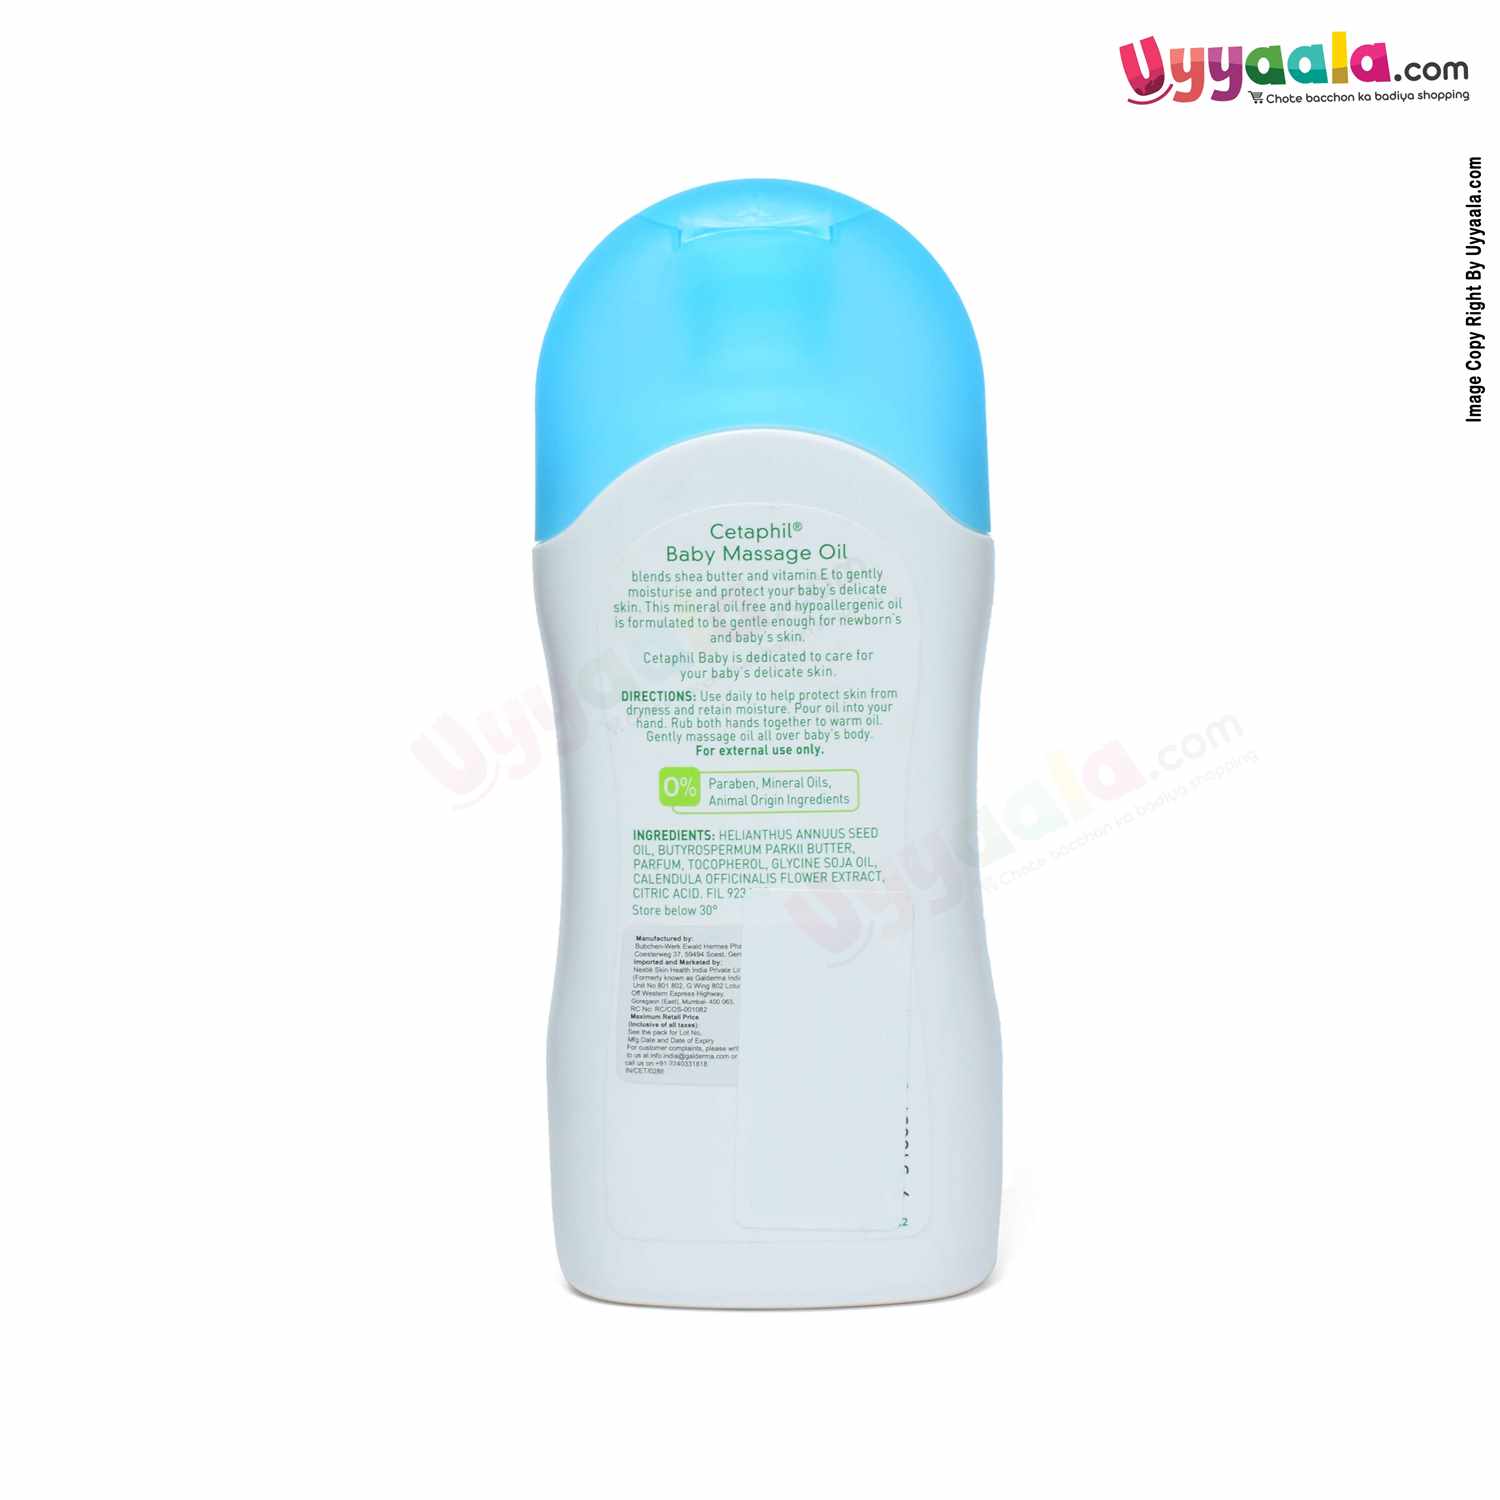 Baby massage oil for face & body